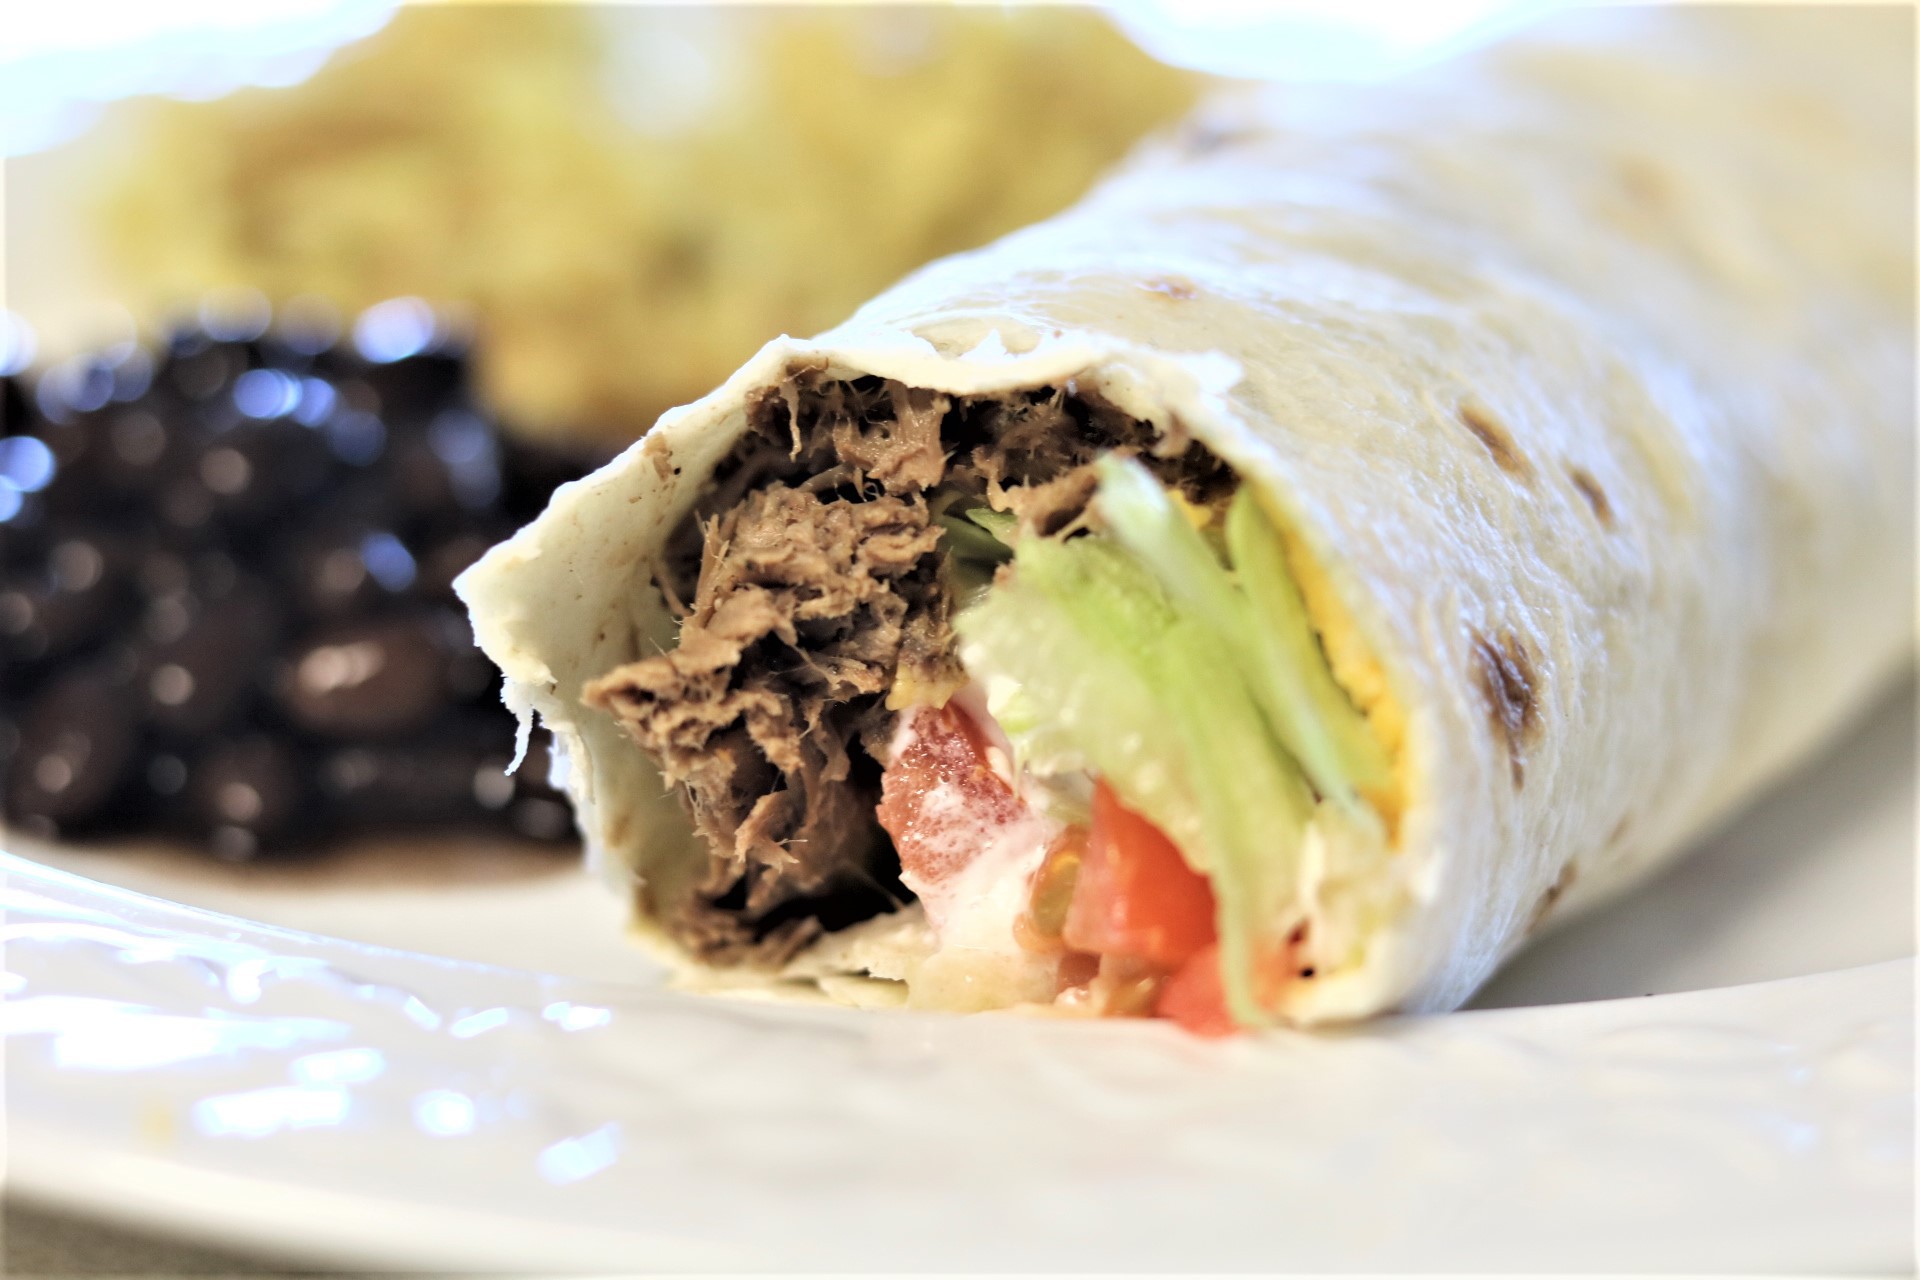 SHREDDED BEEF BURRITOS - that my Mexican brother in law LOVED!